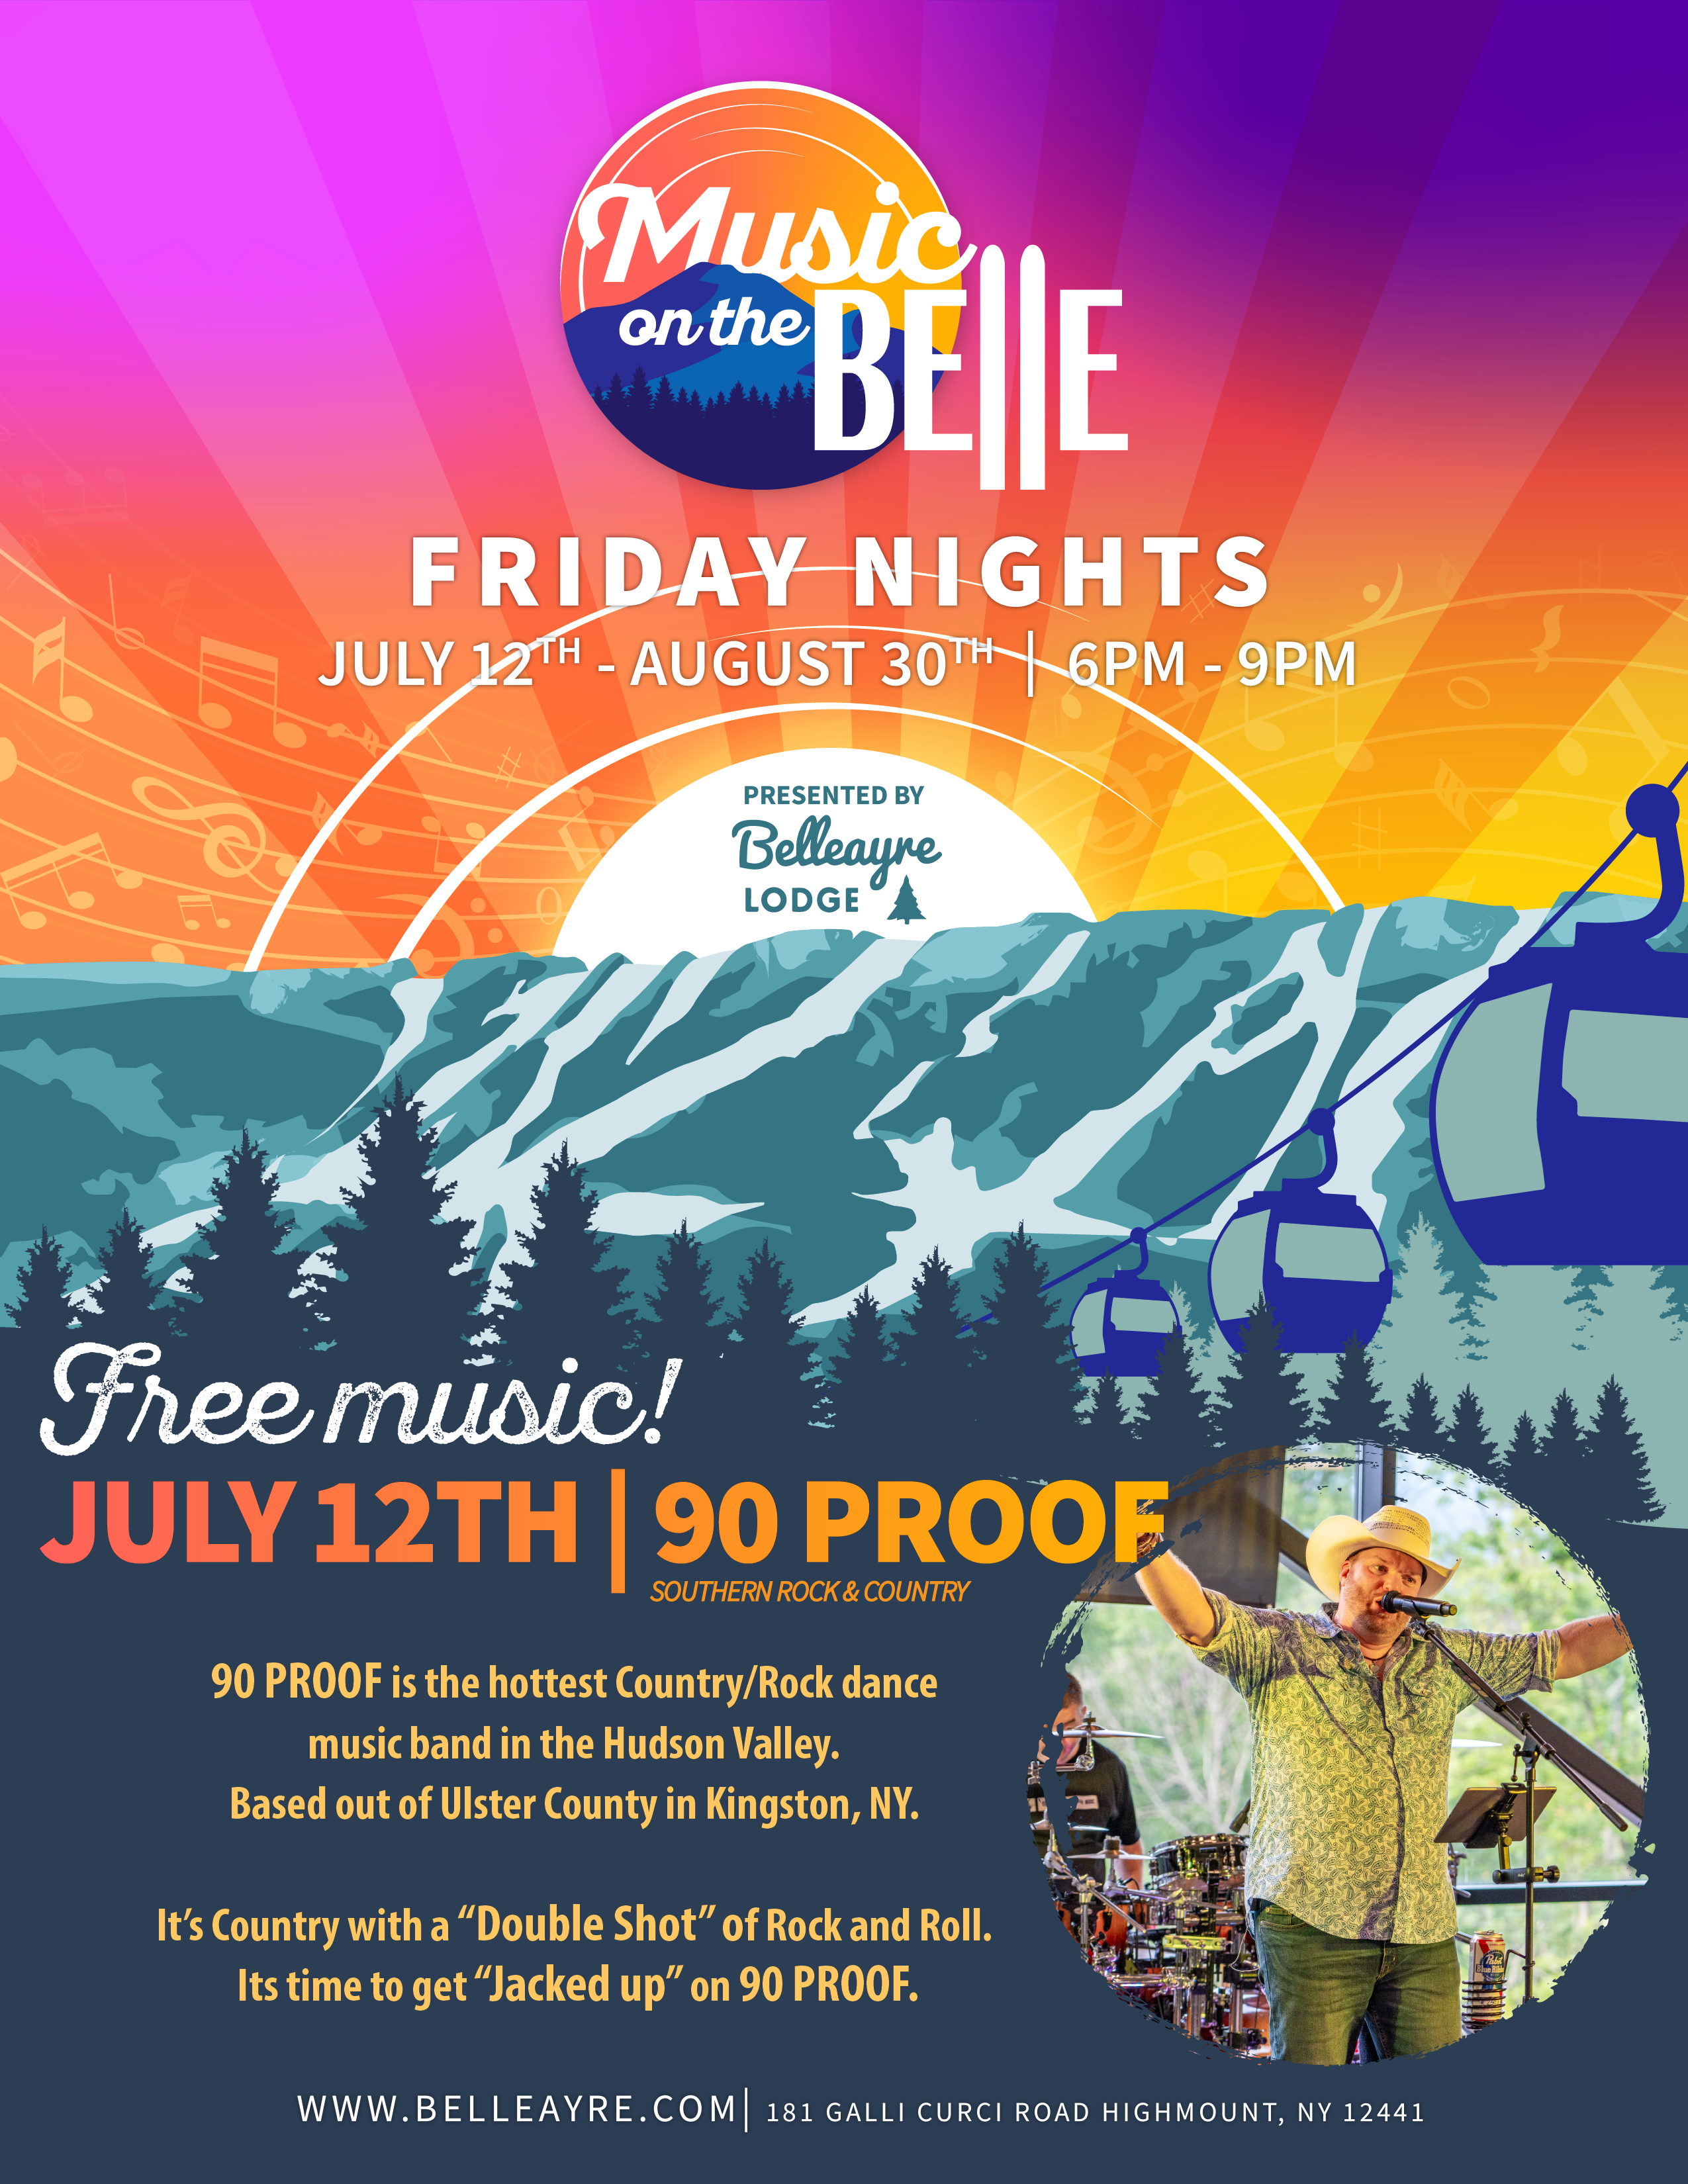 90 Proof Music on the Belle Friday nights flyer July 12th